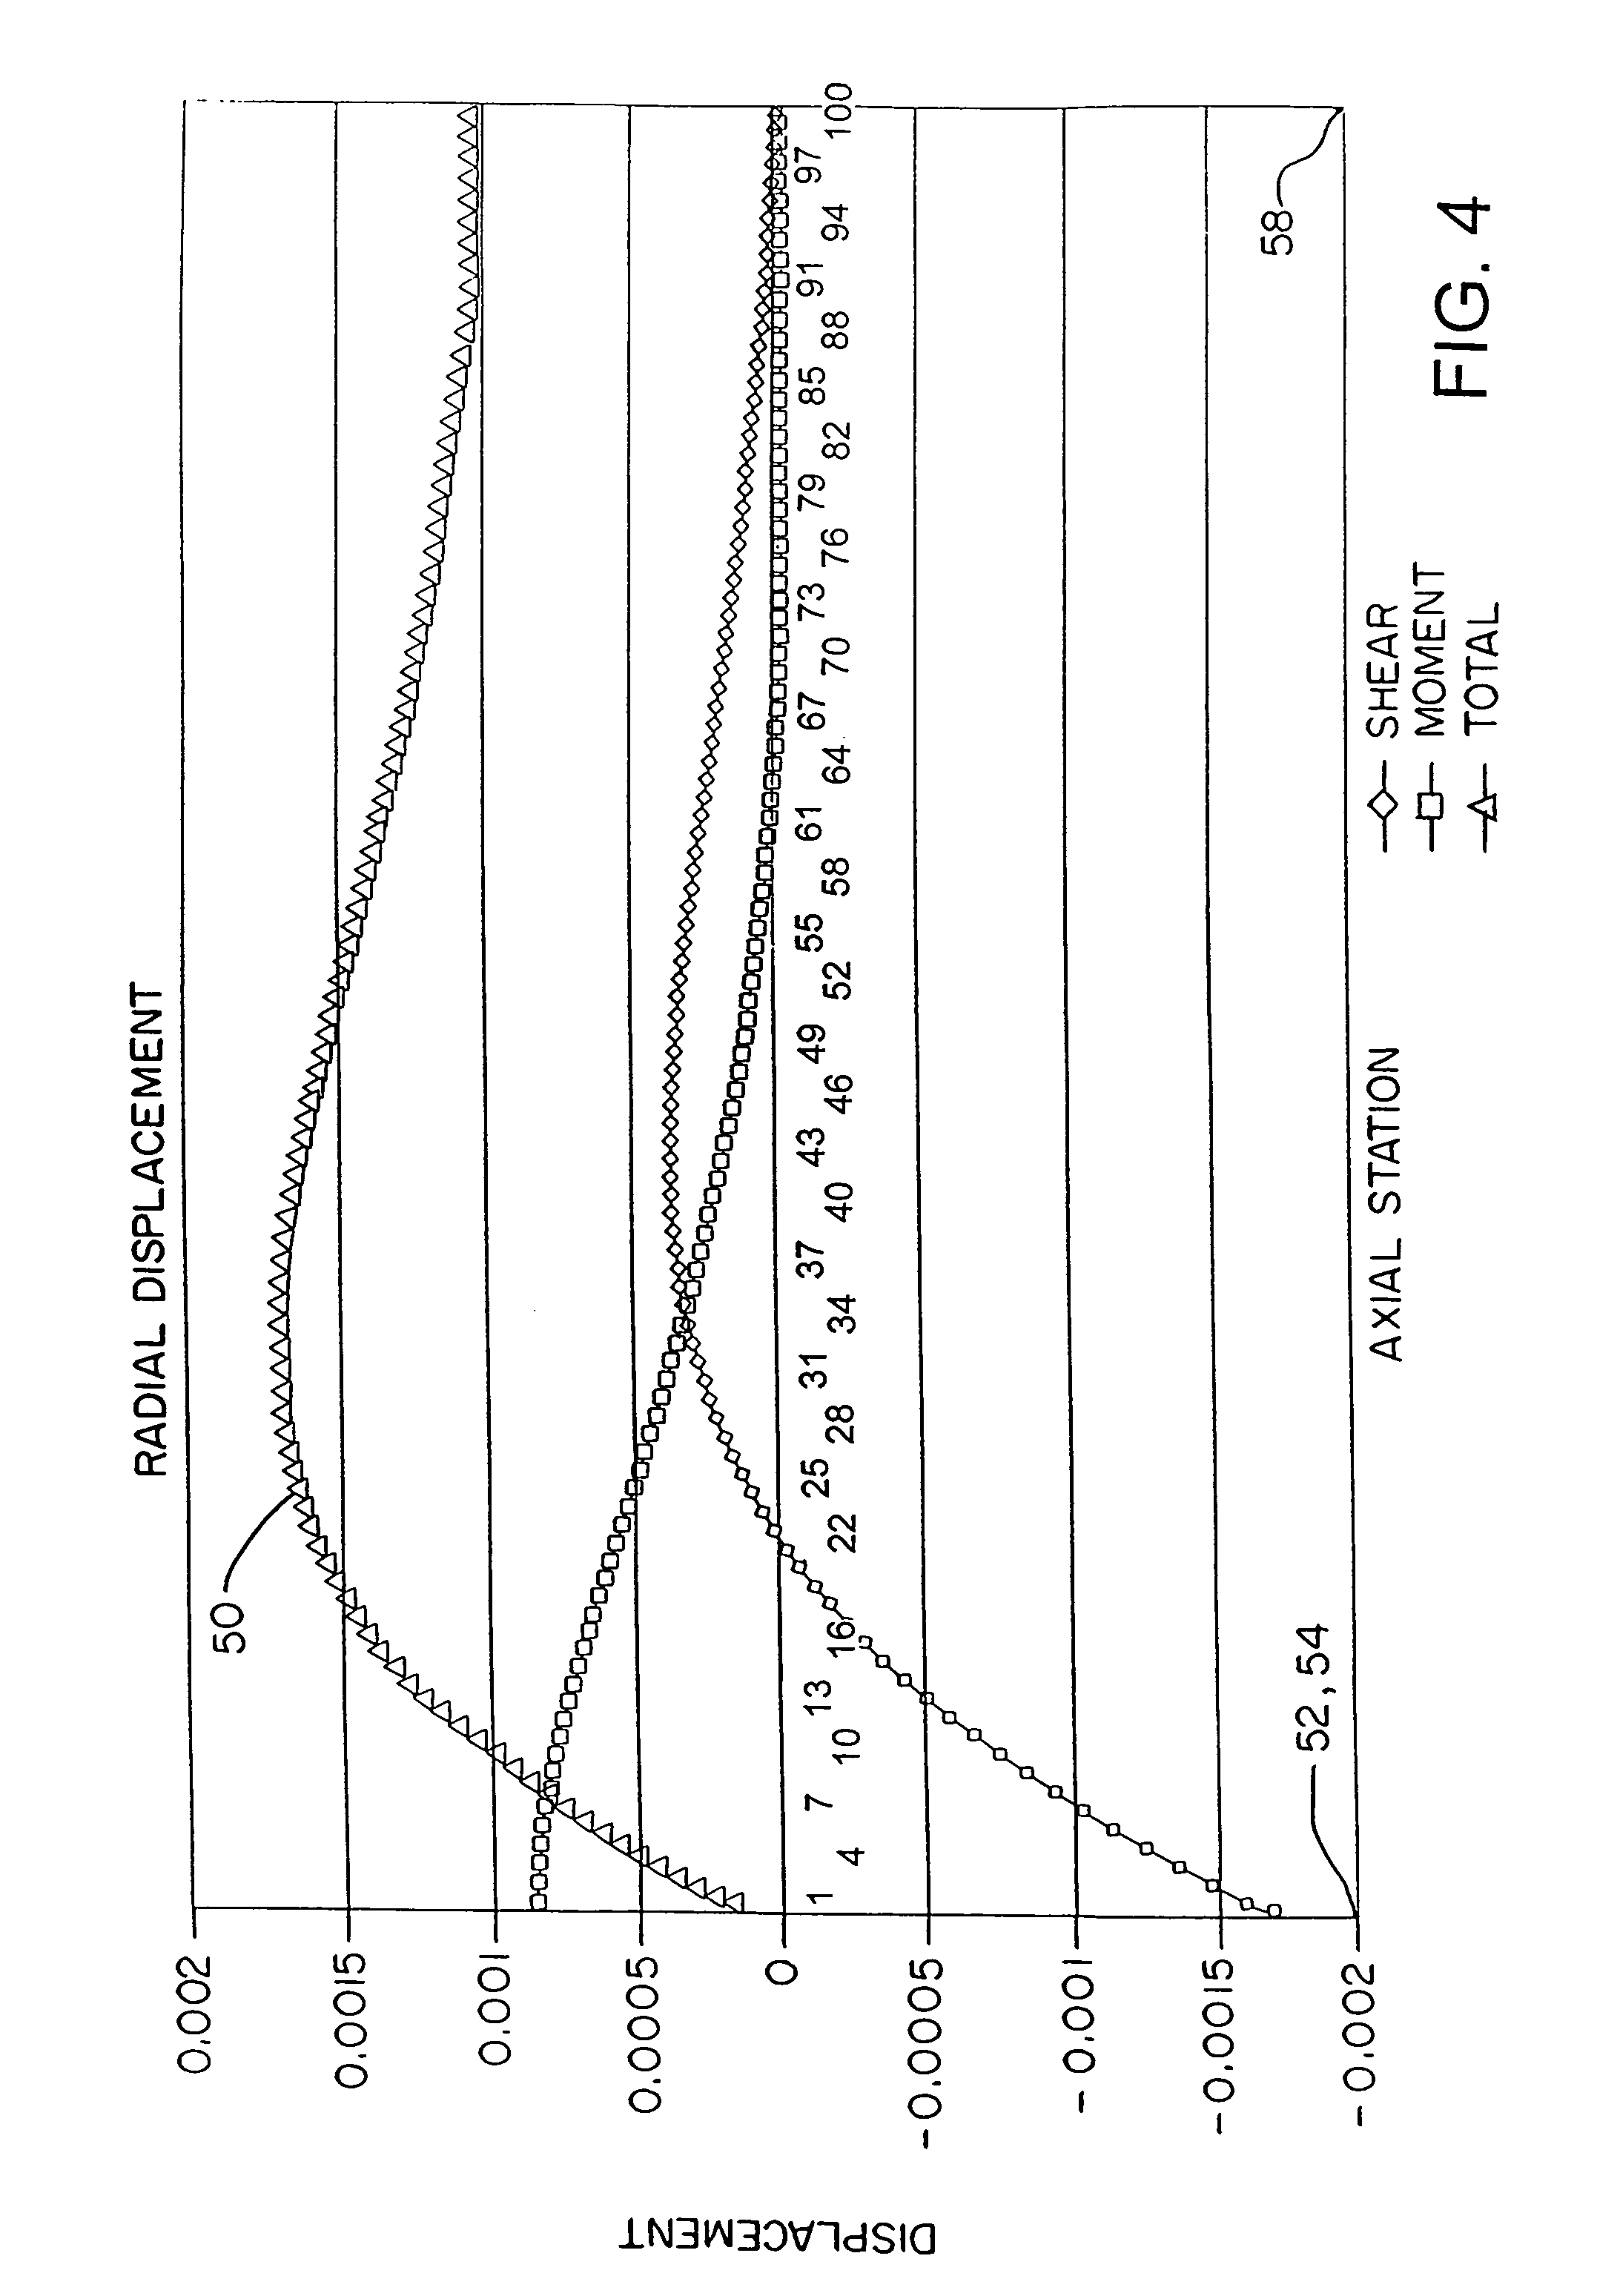 Fluid measuring device and method